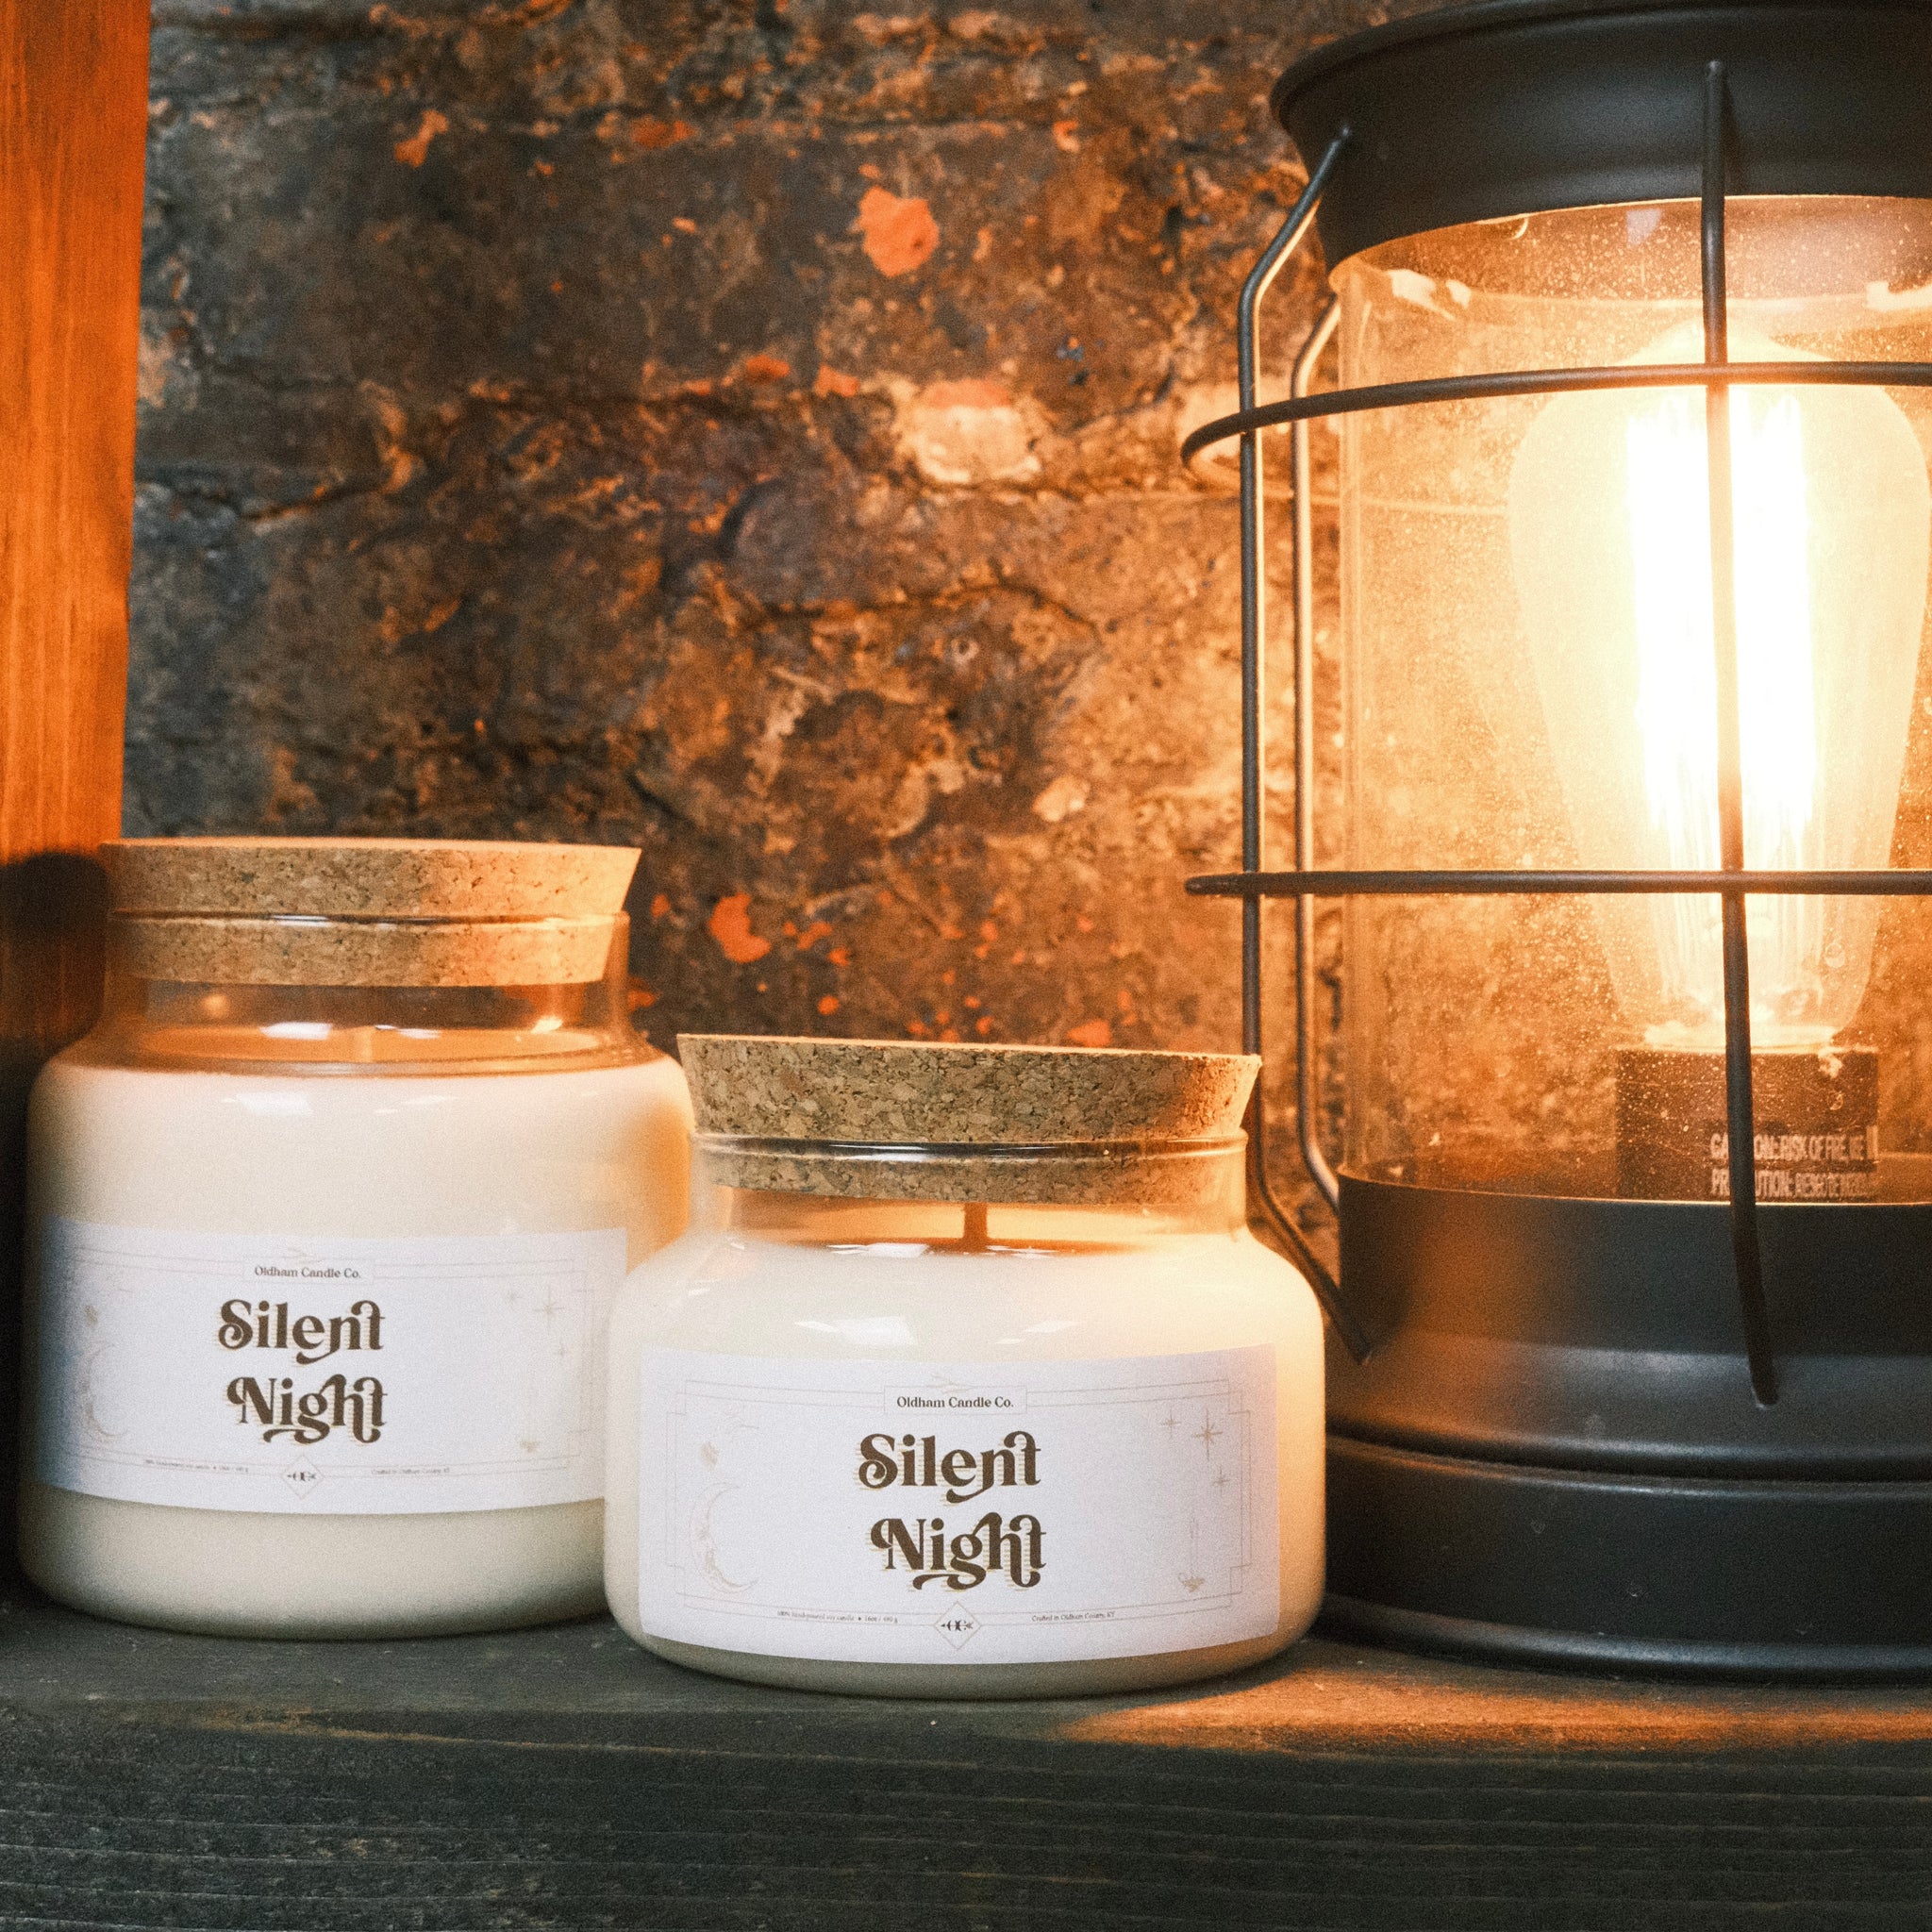 Silent Night Scented Candle